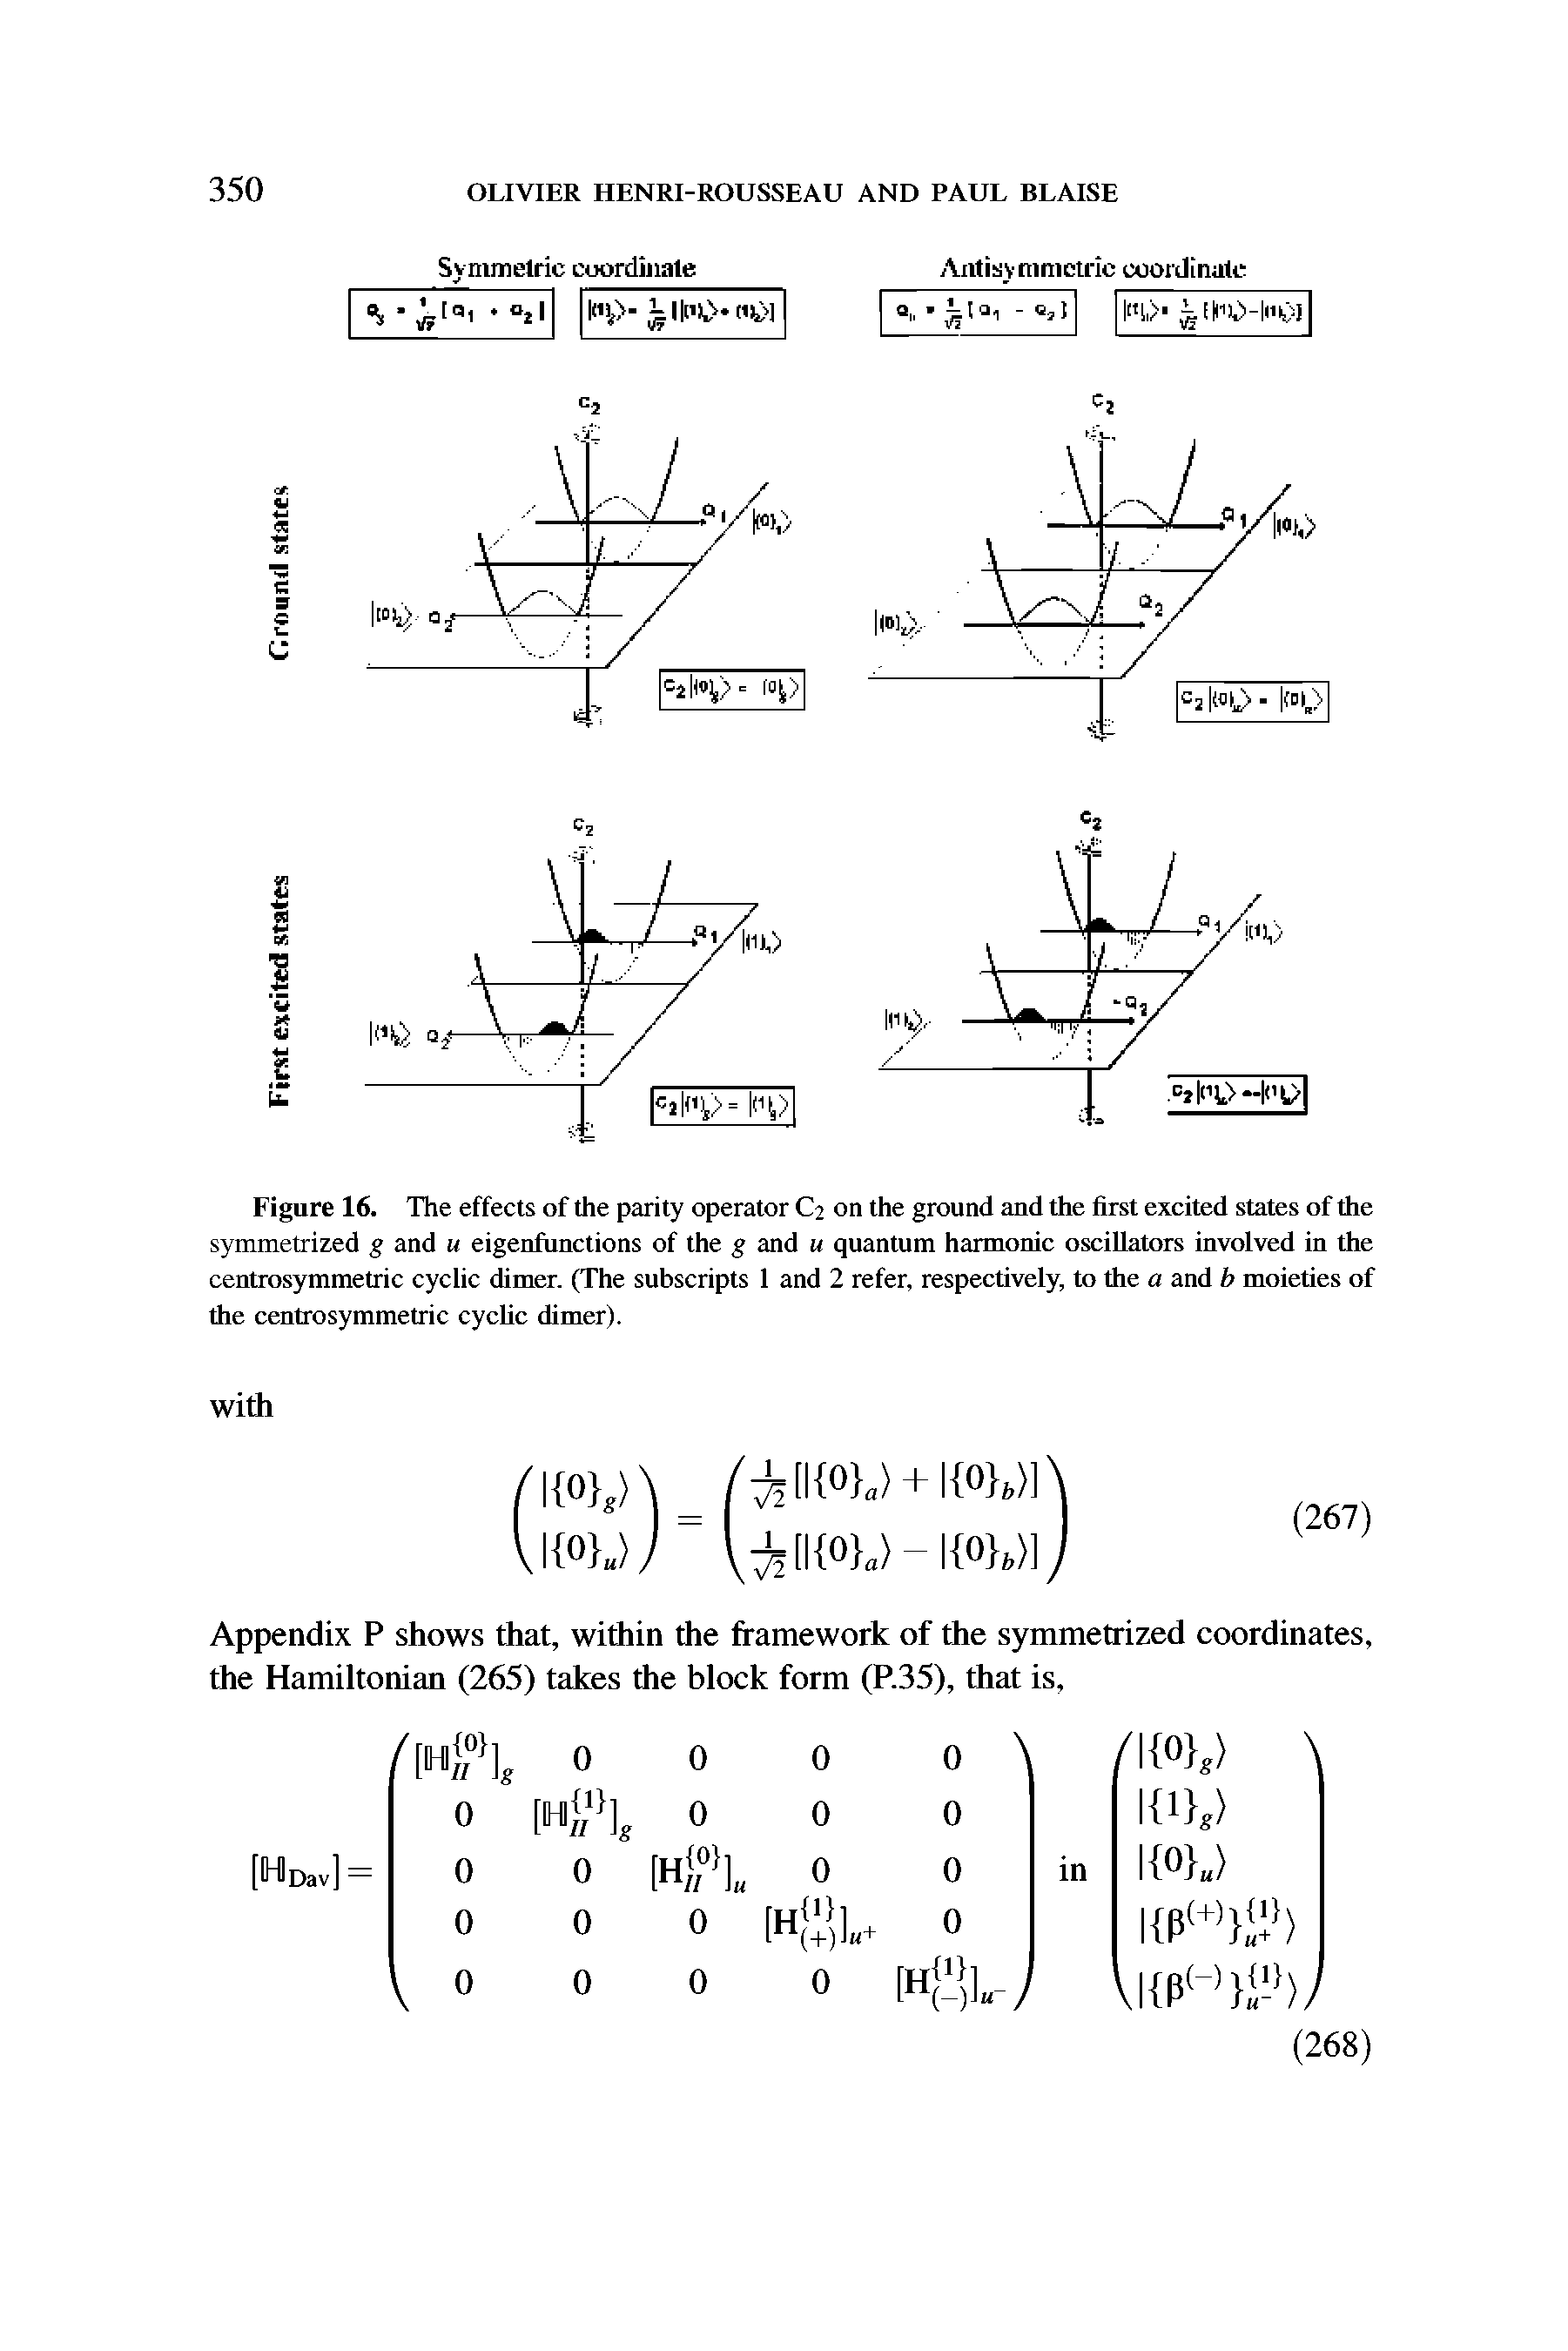 Figure 16. The effects of the parity operator C2 on the ground and the first excited states of the symmetrized g and u eigenfunctions of the g and u quantum harmonic oscillators involved in the centrosymmetric cyclic dimer. (The subscripts 1 and 2 refer, respectively, to the a and b moieties of the centrosymmetric cyclic dimer).